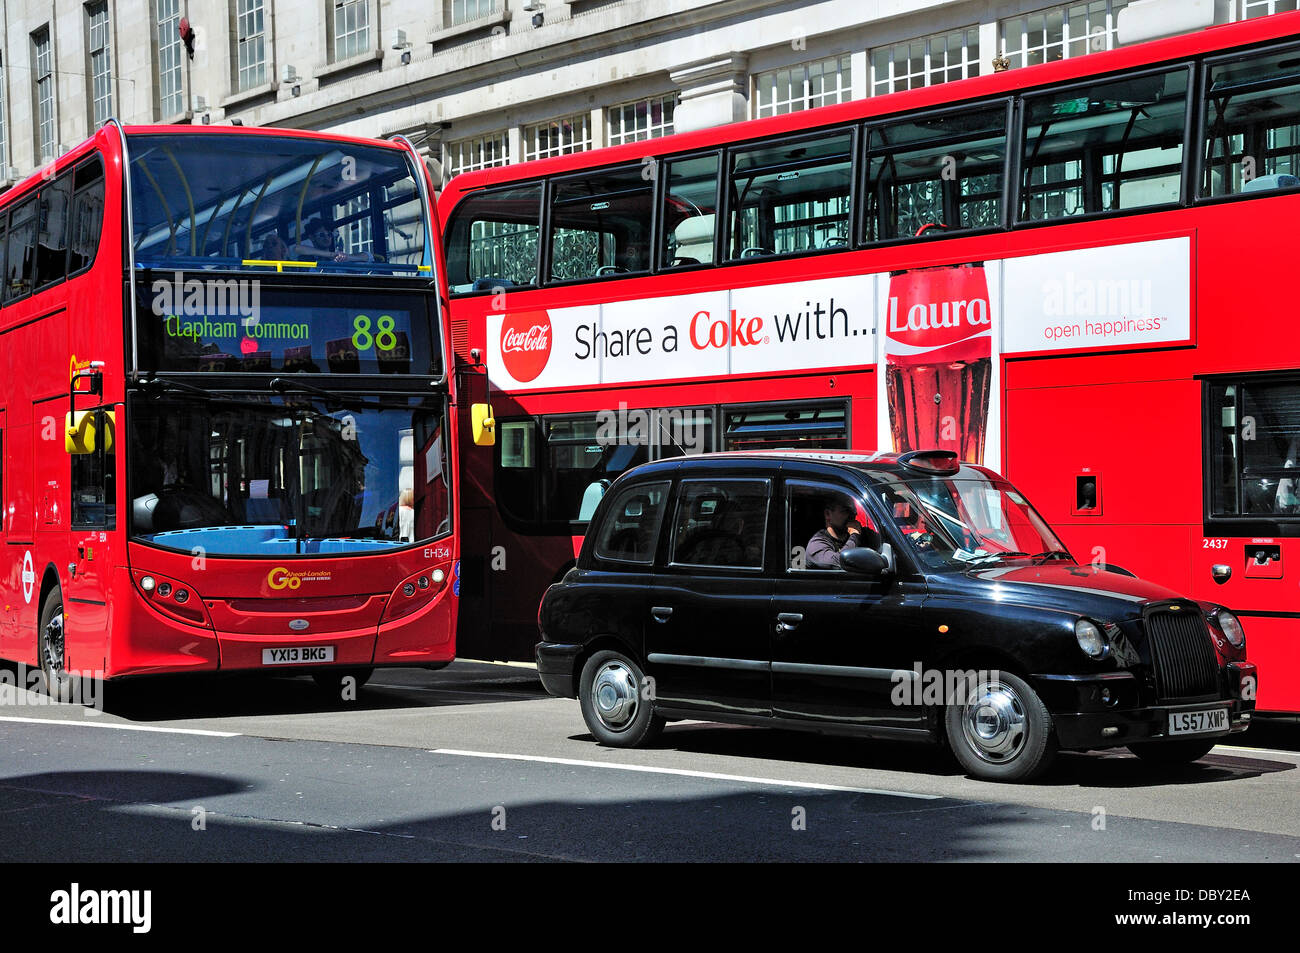 London, England, UK. Public transport - taxi and red buses Stock Photo